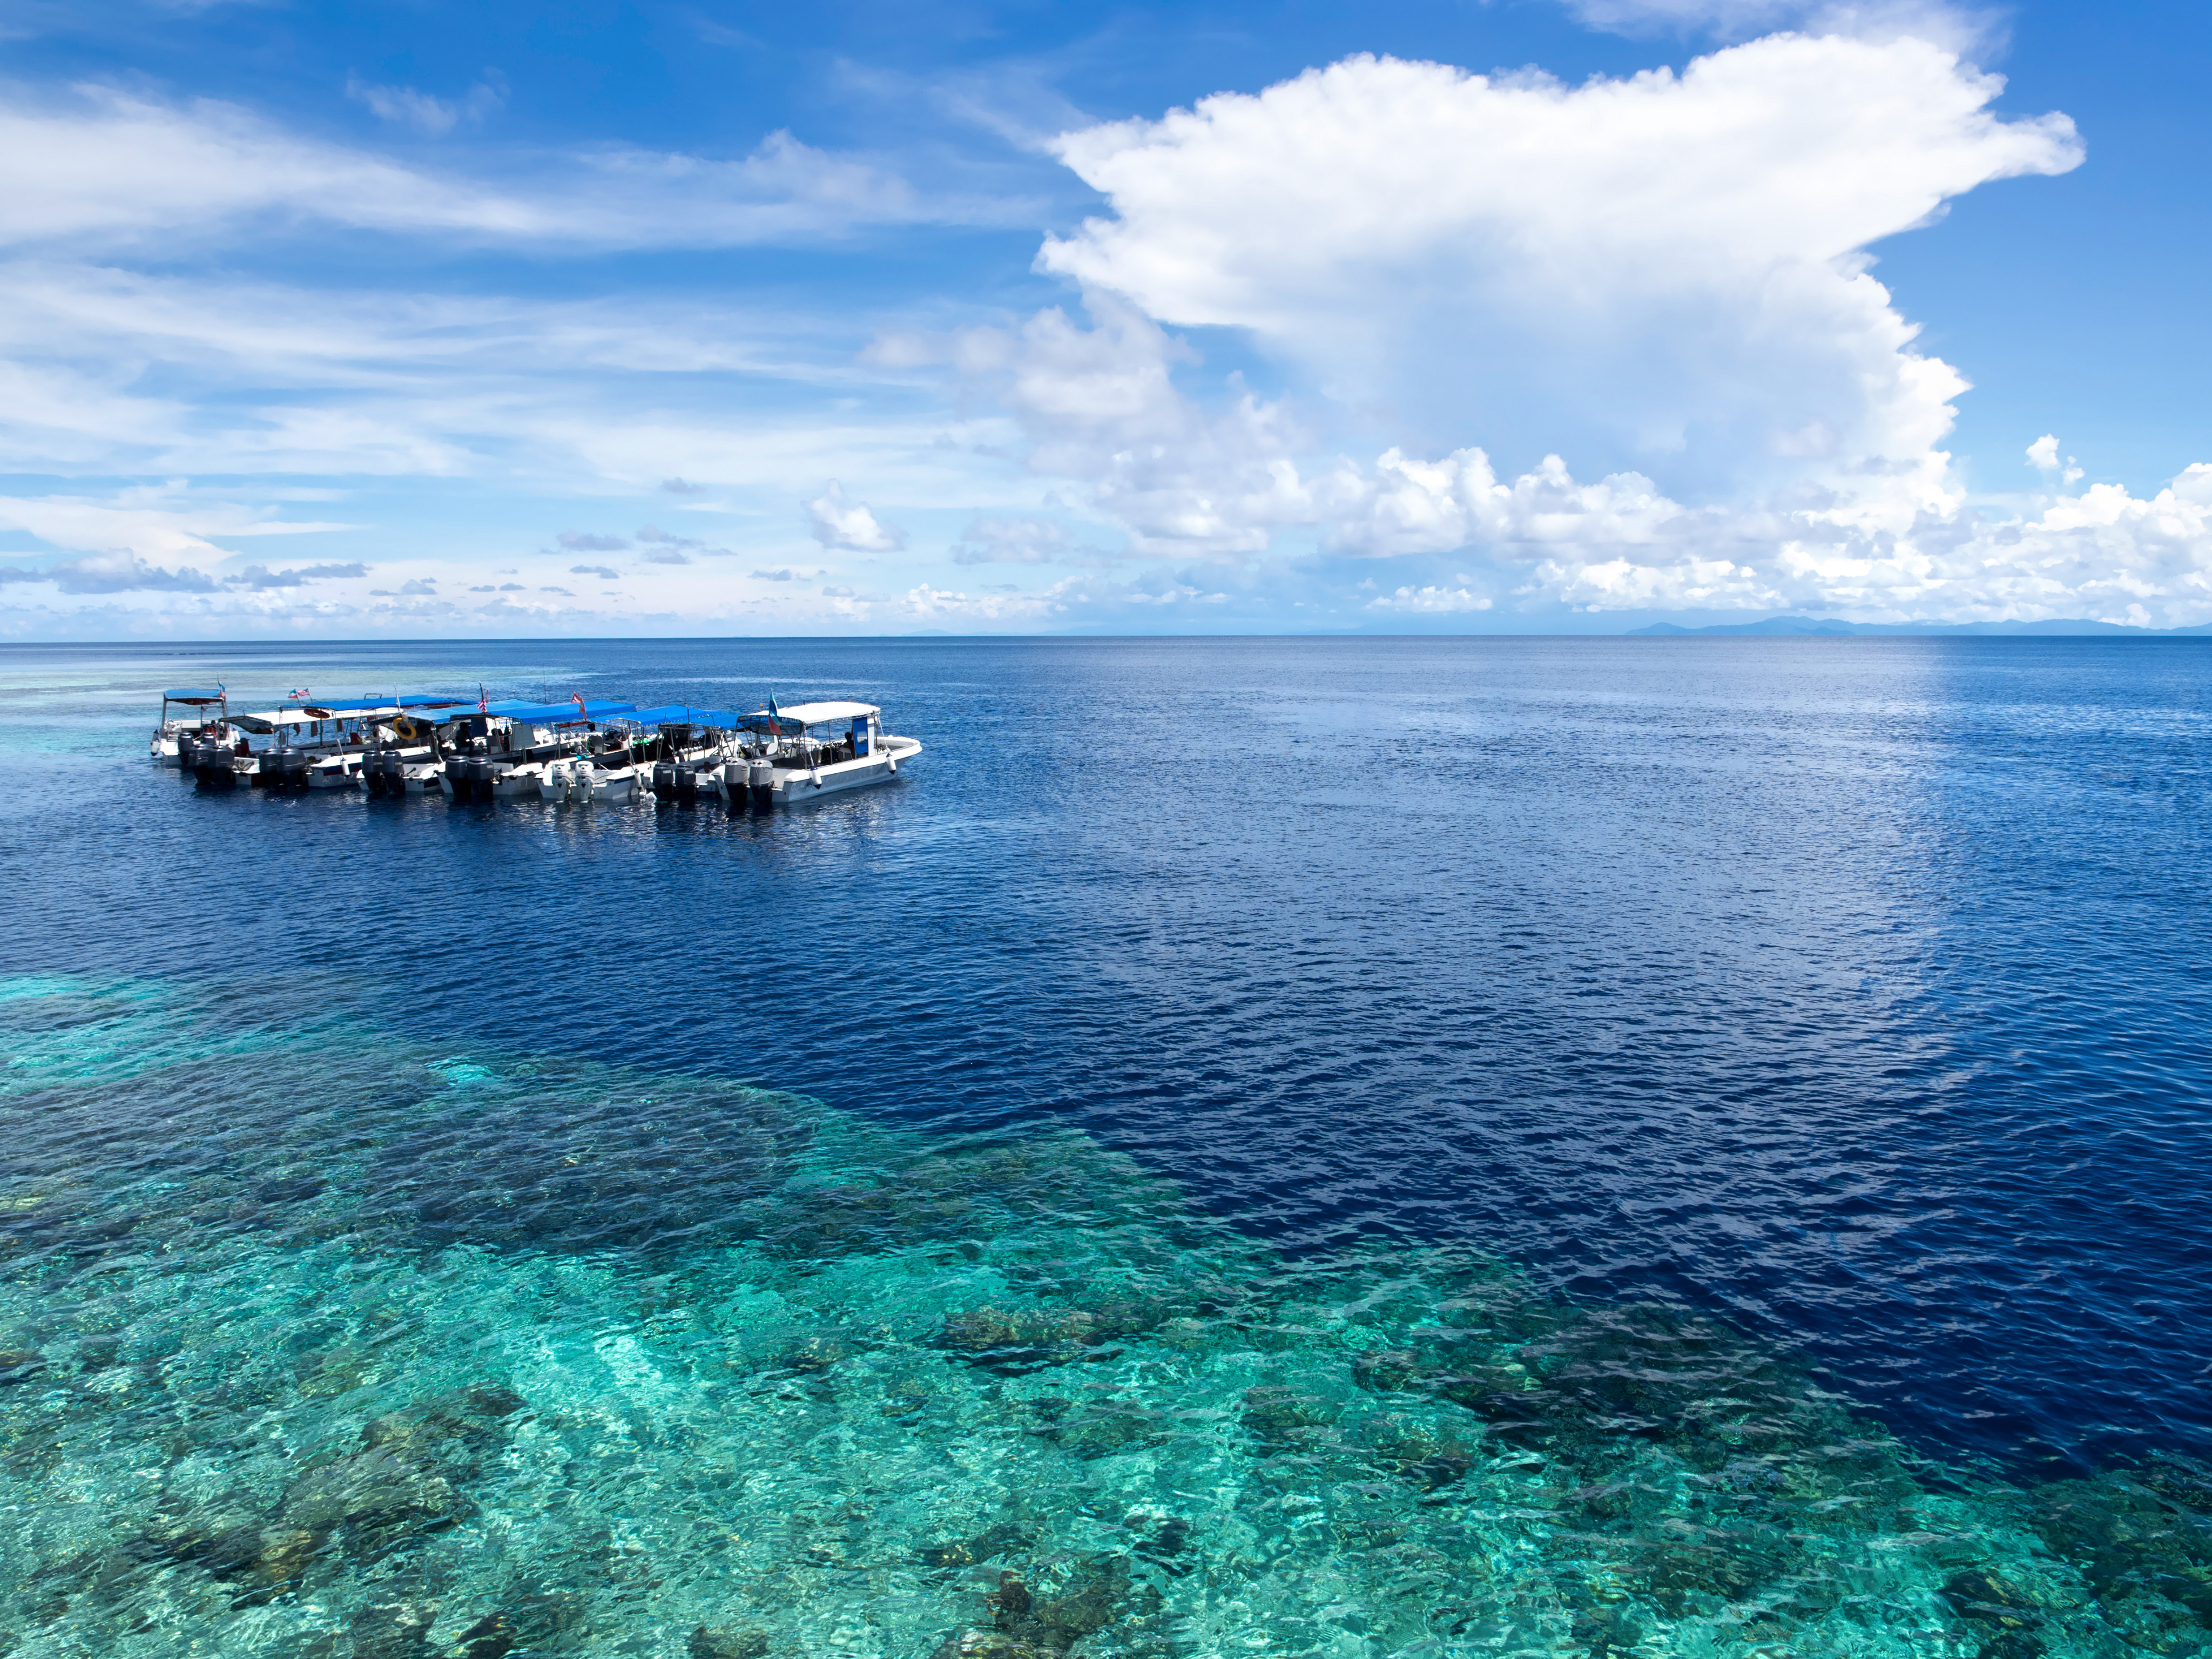 A Chinese tourist drowned while snorkeling on an island in Malaysia’s Sabah state. Photo: Shutterstock